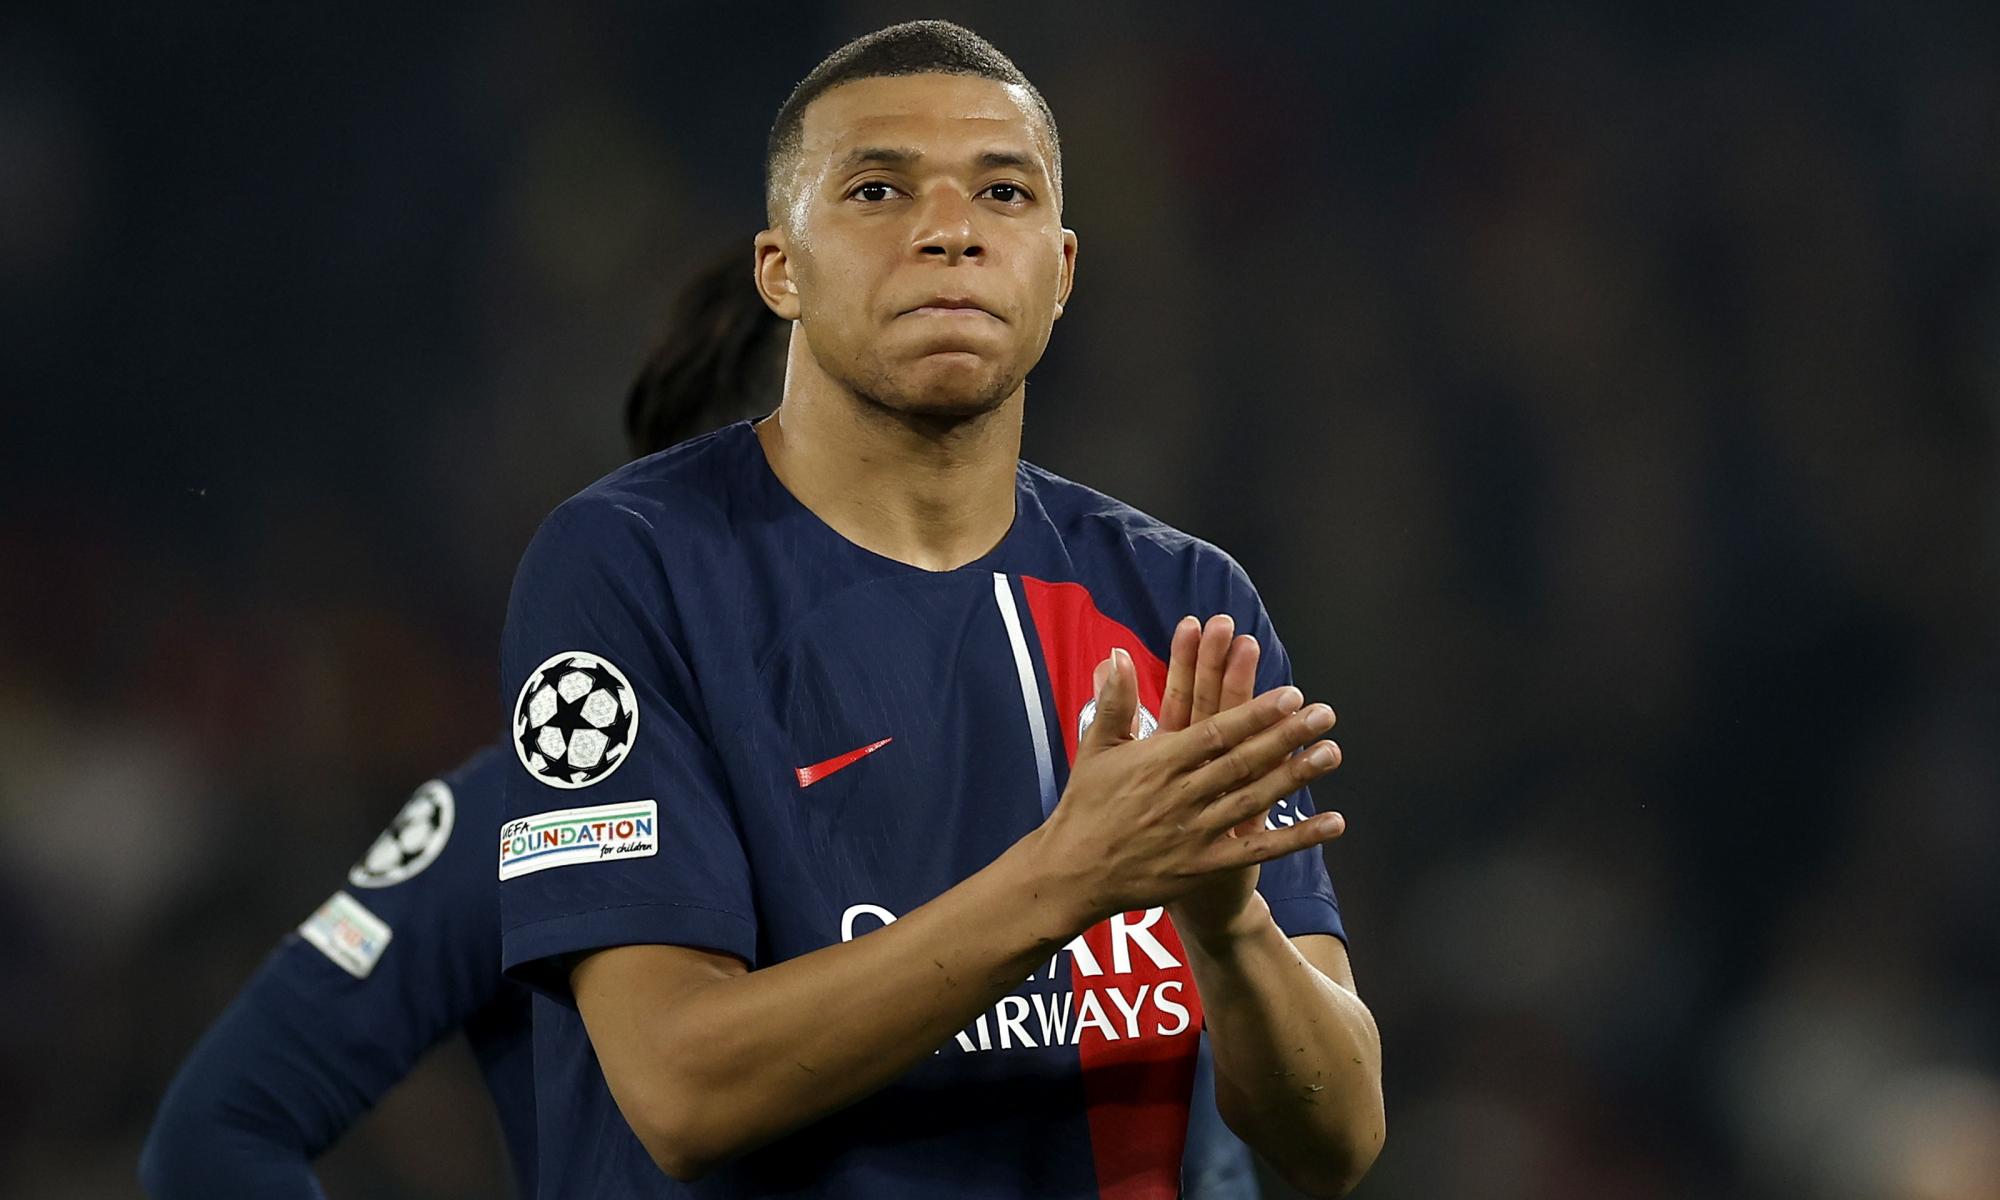 dortmund bring down curtain on kylian mbappé’s wasted years at psg